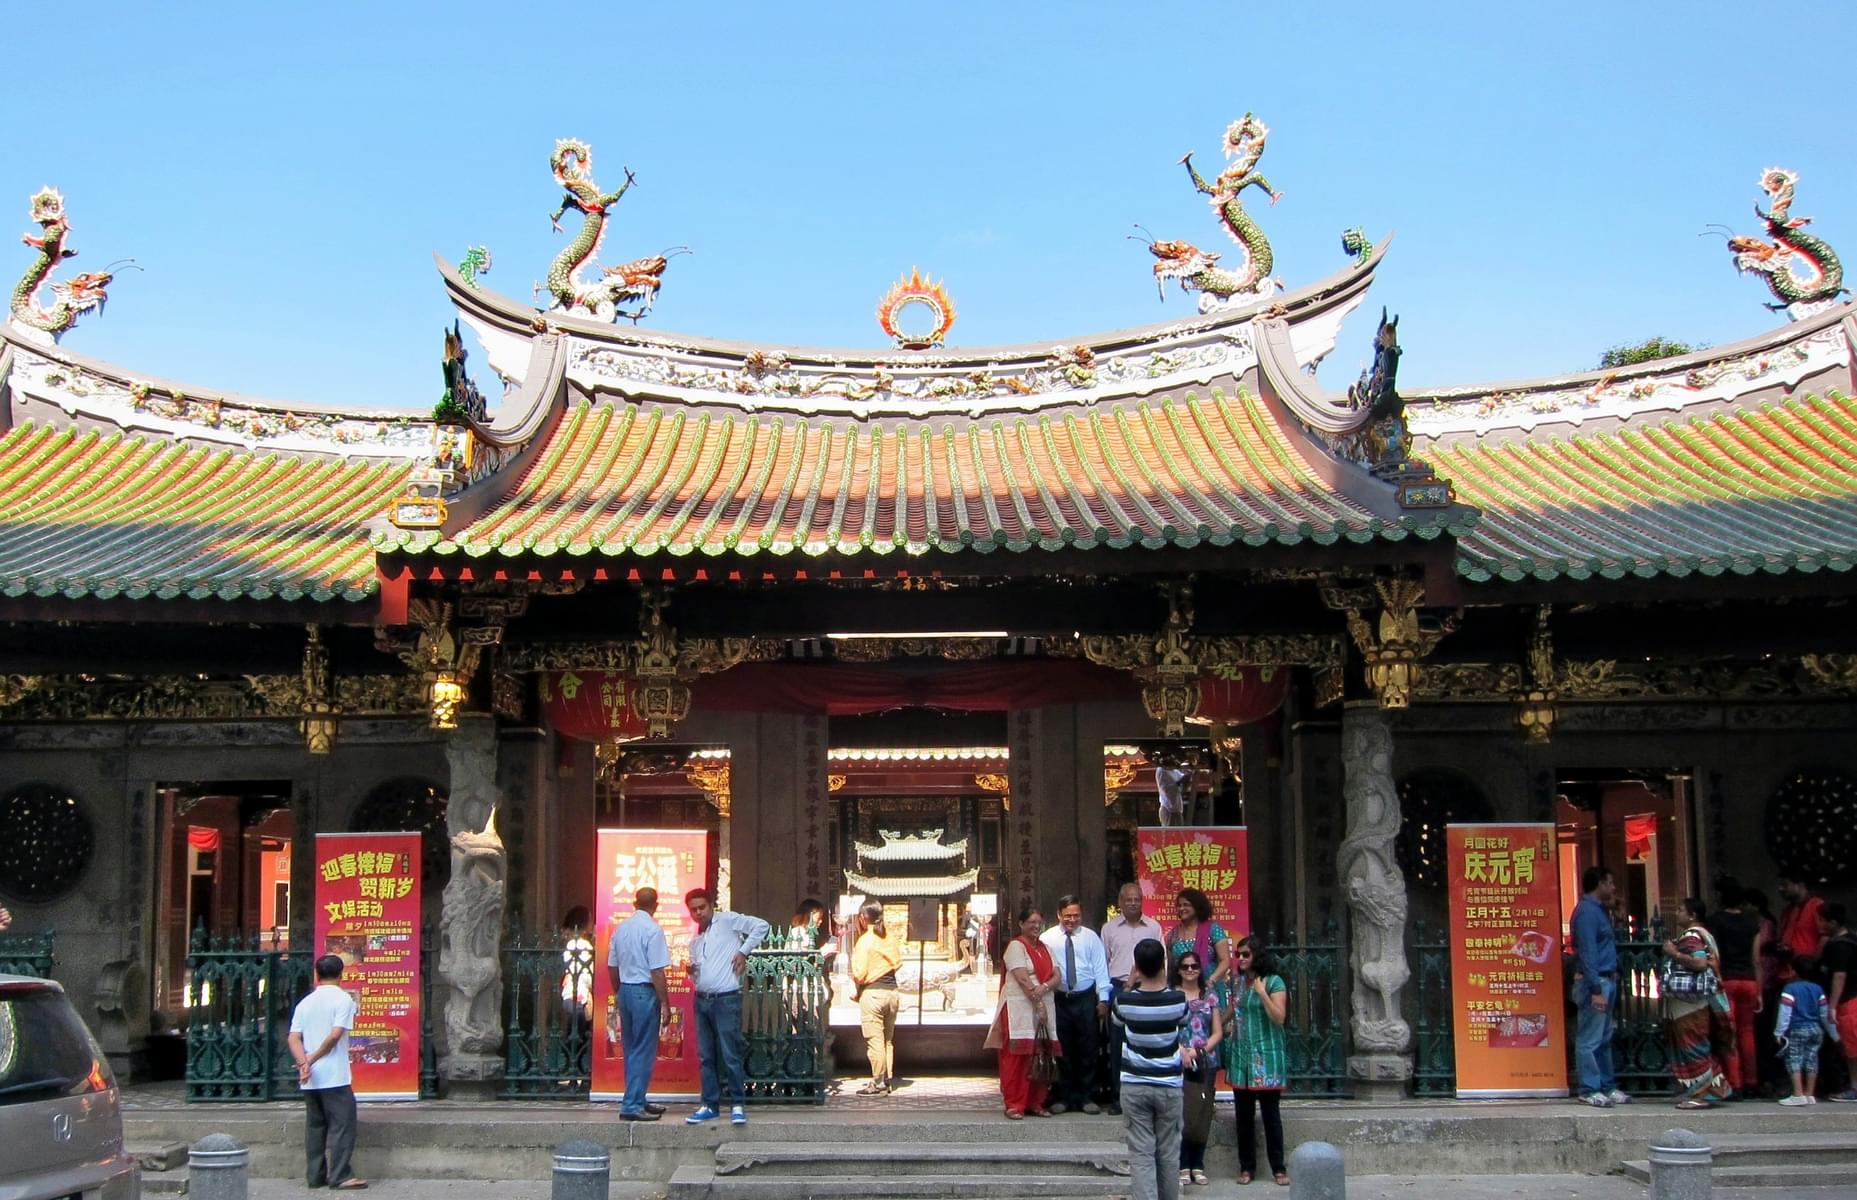 Admire the magnificent Thian Hock Keng Temple in Chinatown